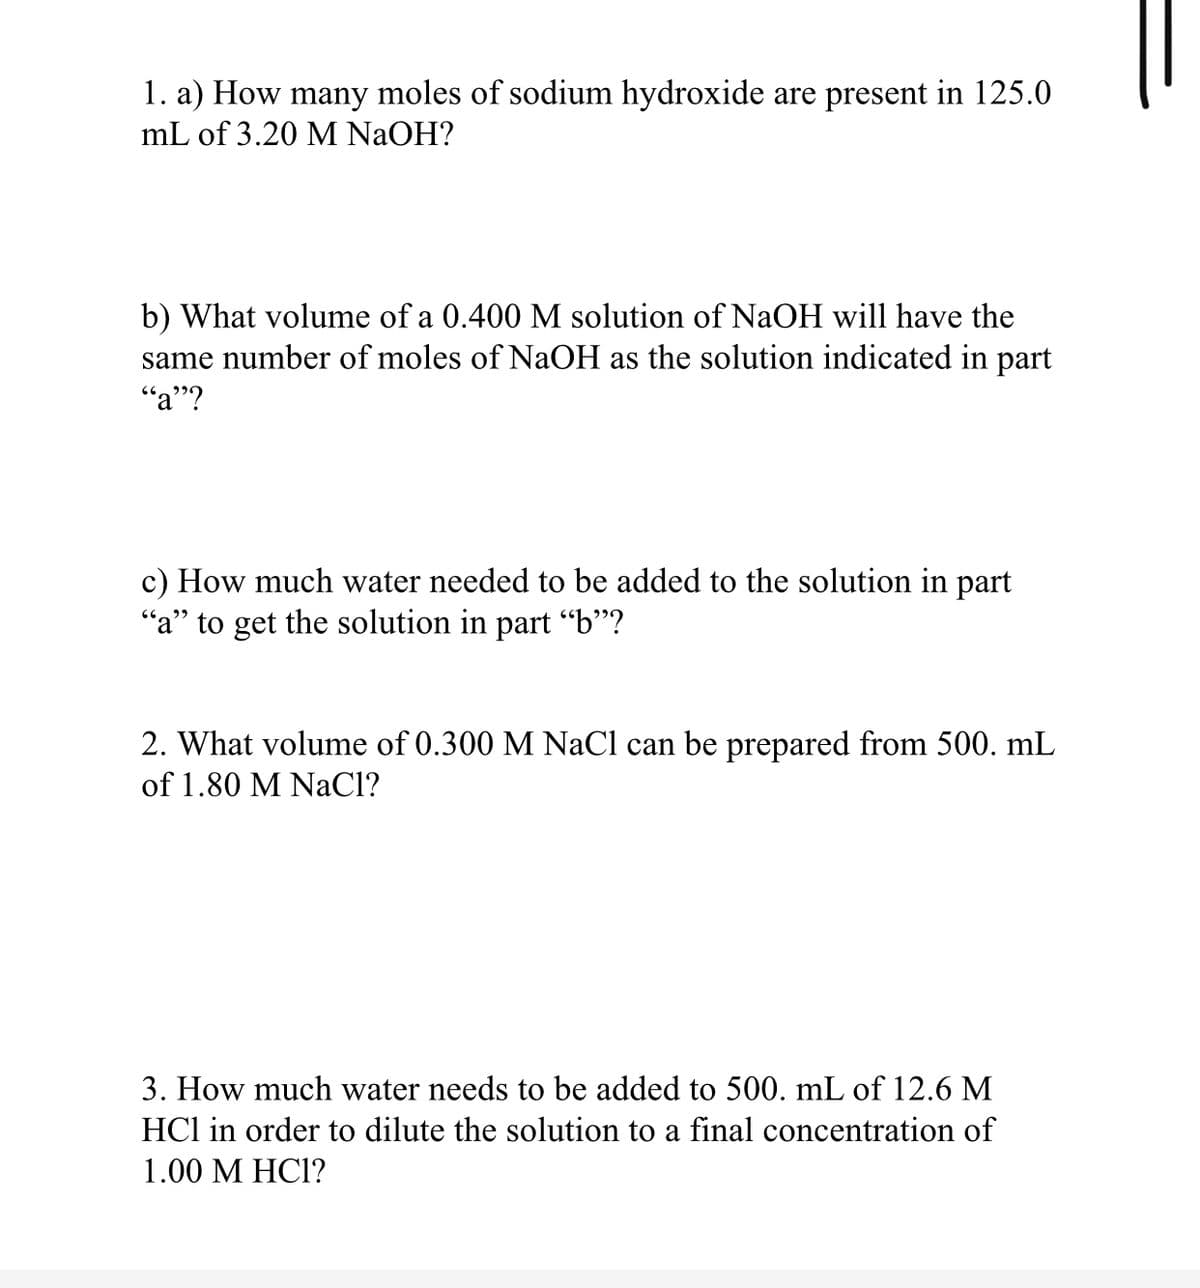 1. a) How many moles of sodium hydroxide are present in 125.0
mL of 3.20 M NaOH?
b) What volume of a 0.400 M solution of NaOH will have the
same number of moles of NaOH as the solution indicated in part
"a"?
c) How much water needed to be added to the solution in part
"a" to get the solution in part “b"?
2. What volume of 0.300 M NaCl can be prepared from 500. mL
of 1.80 M NaCl?
3. How much water needs to be added to 500. mL of 12.6 M
HCl in order to dilute the solution to a final concentration of
1.00 M HC1?
